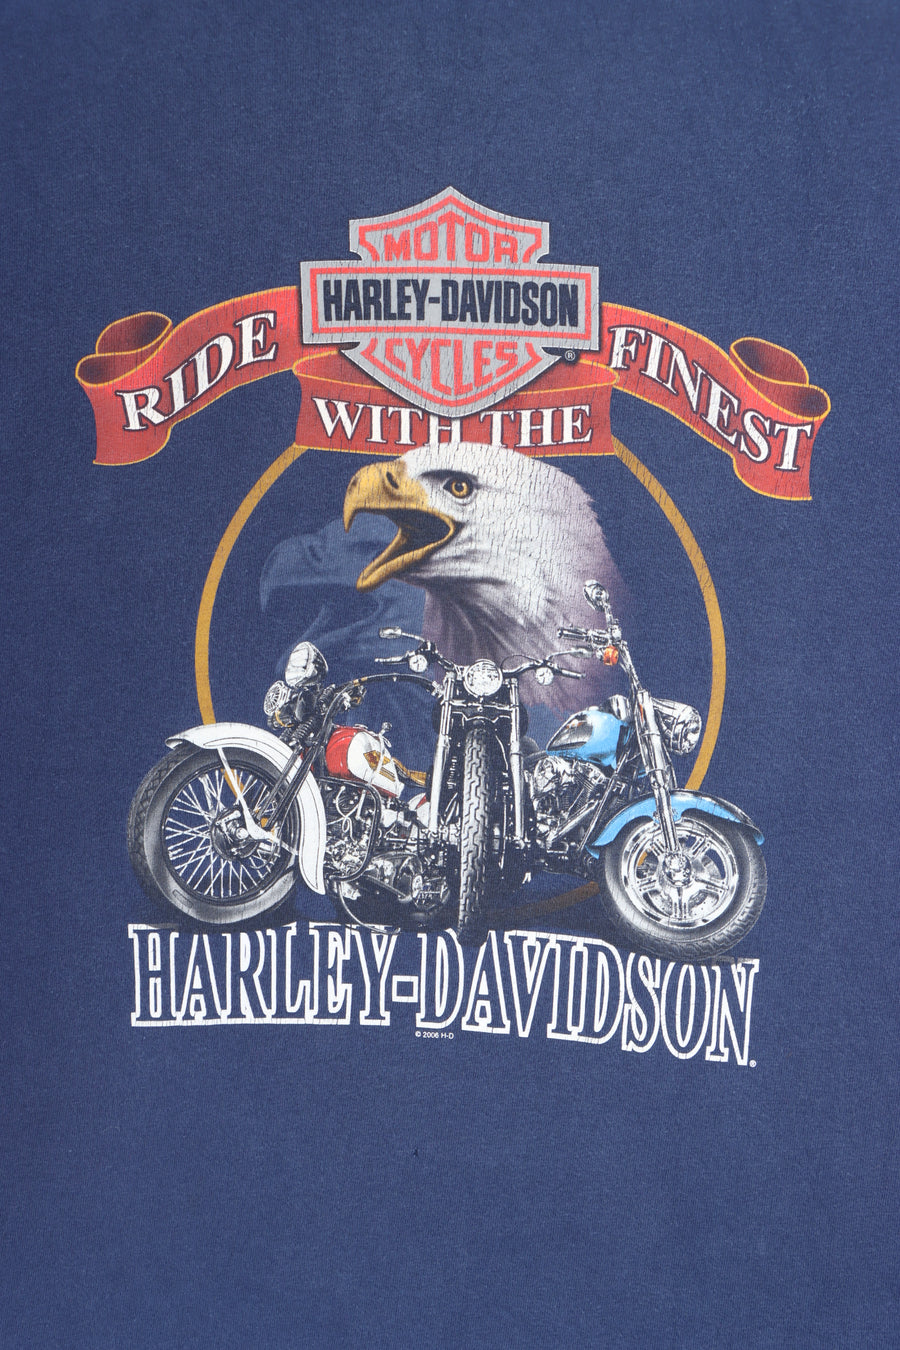 HARLEY DAVIDSON "Ride With The Finest" Front Back T-Shirt (L)